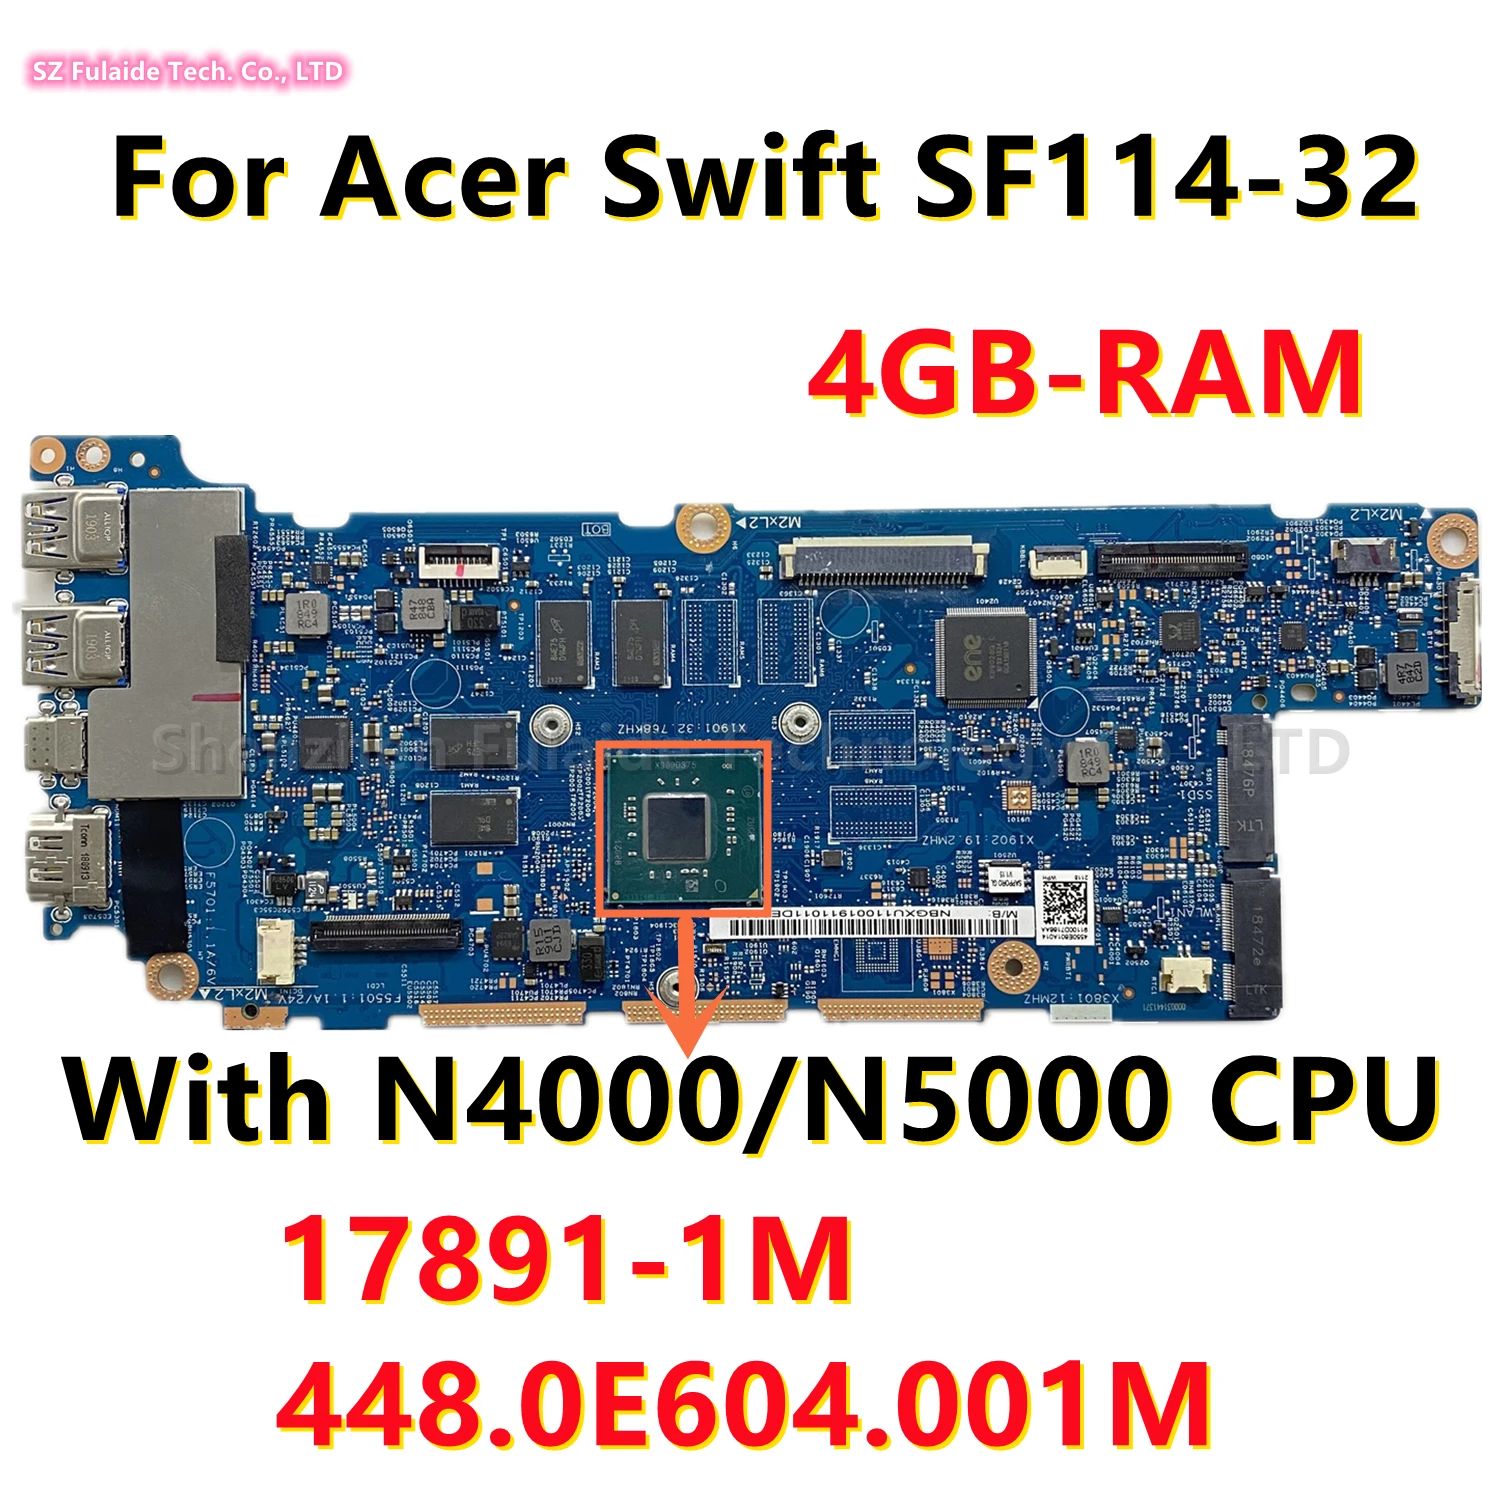 

NBGXU11001 NB.GXU11.001 For Acer Swift SF114-32 Laptop Motherboard With N4000/N5000 CPU 4GB-RAM 17891-1M 448.0E604.001M 100%Test